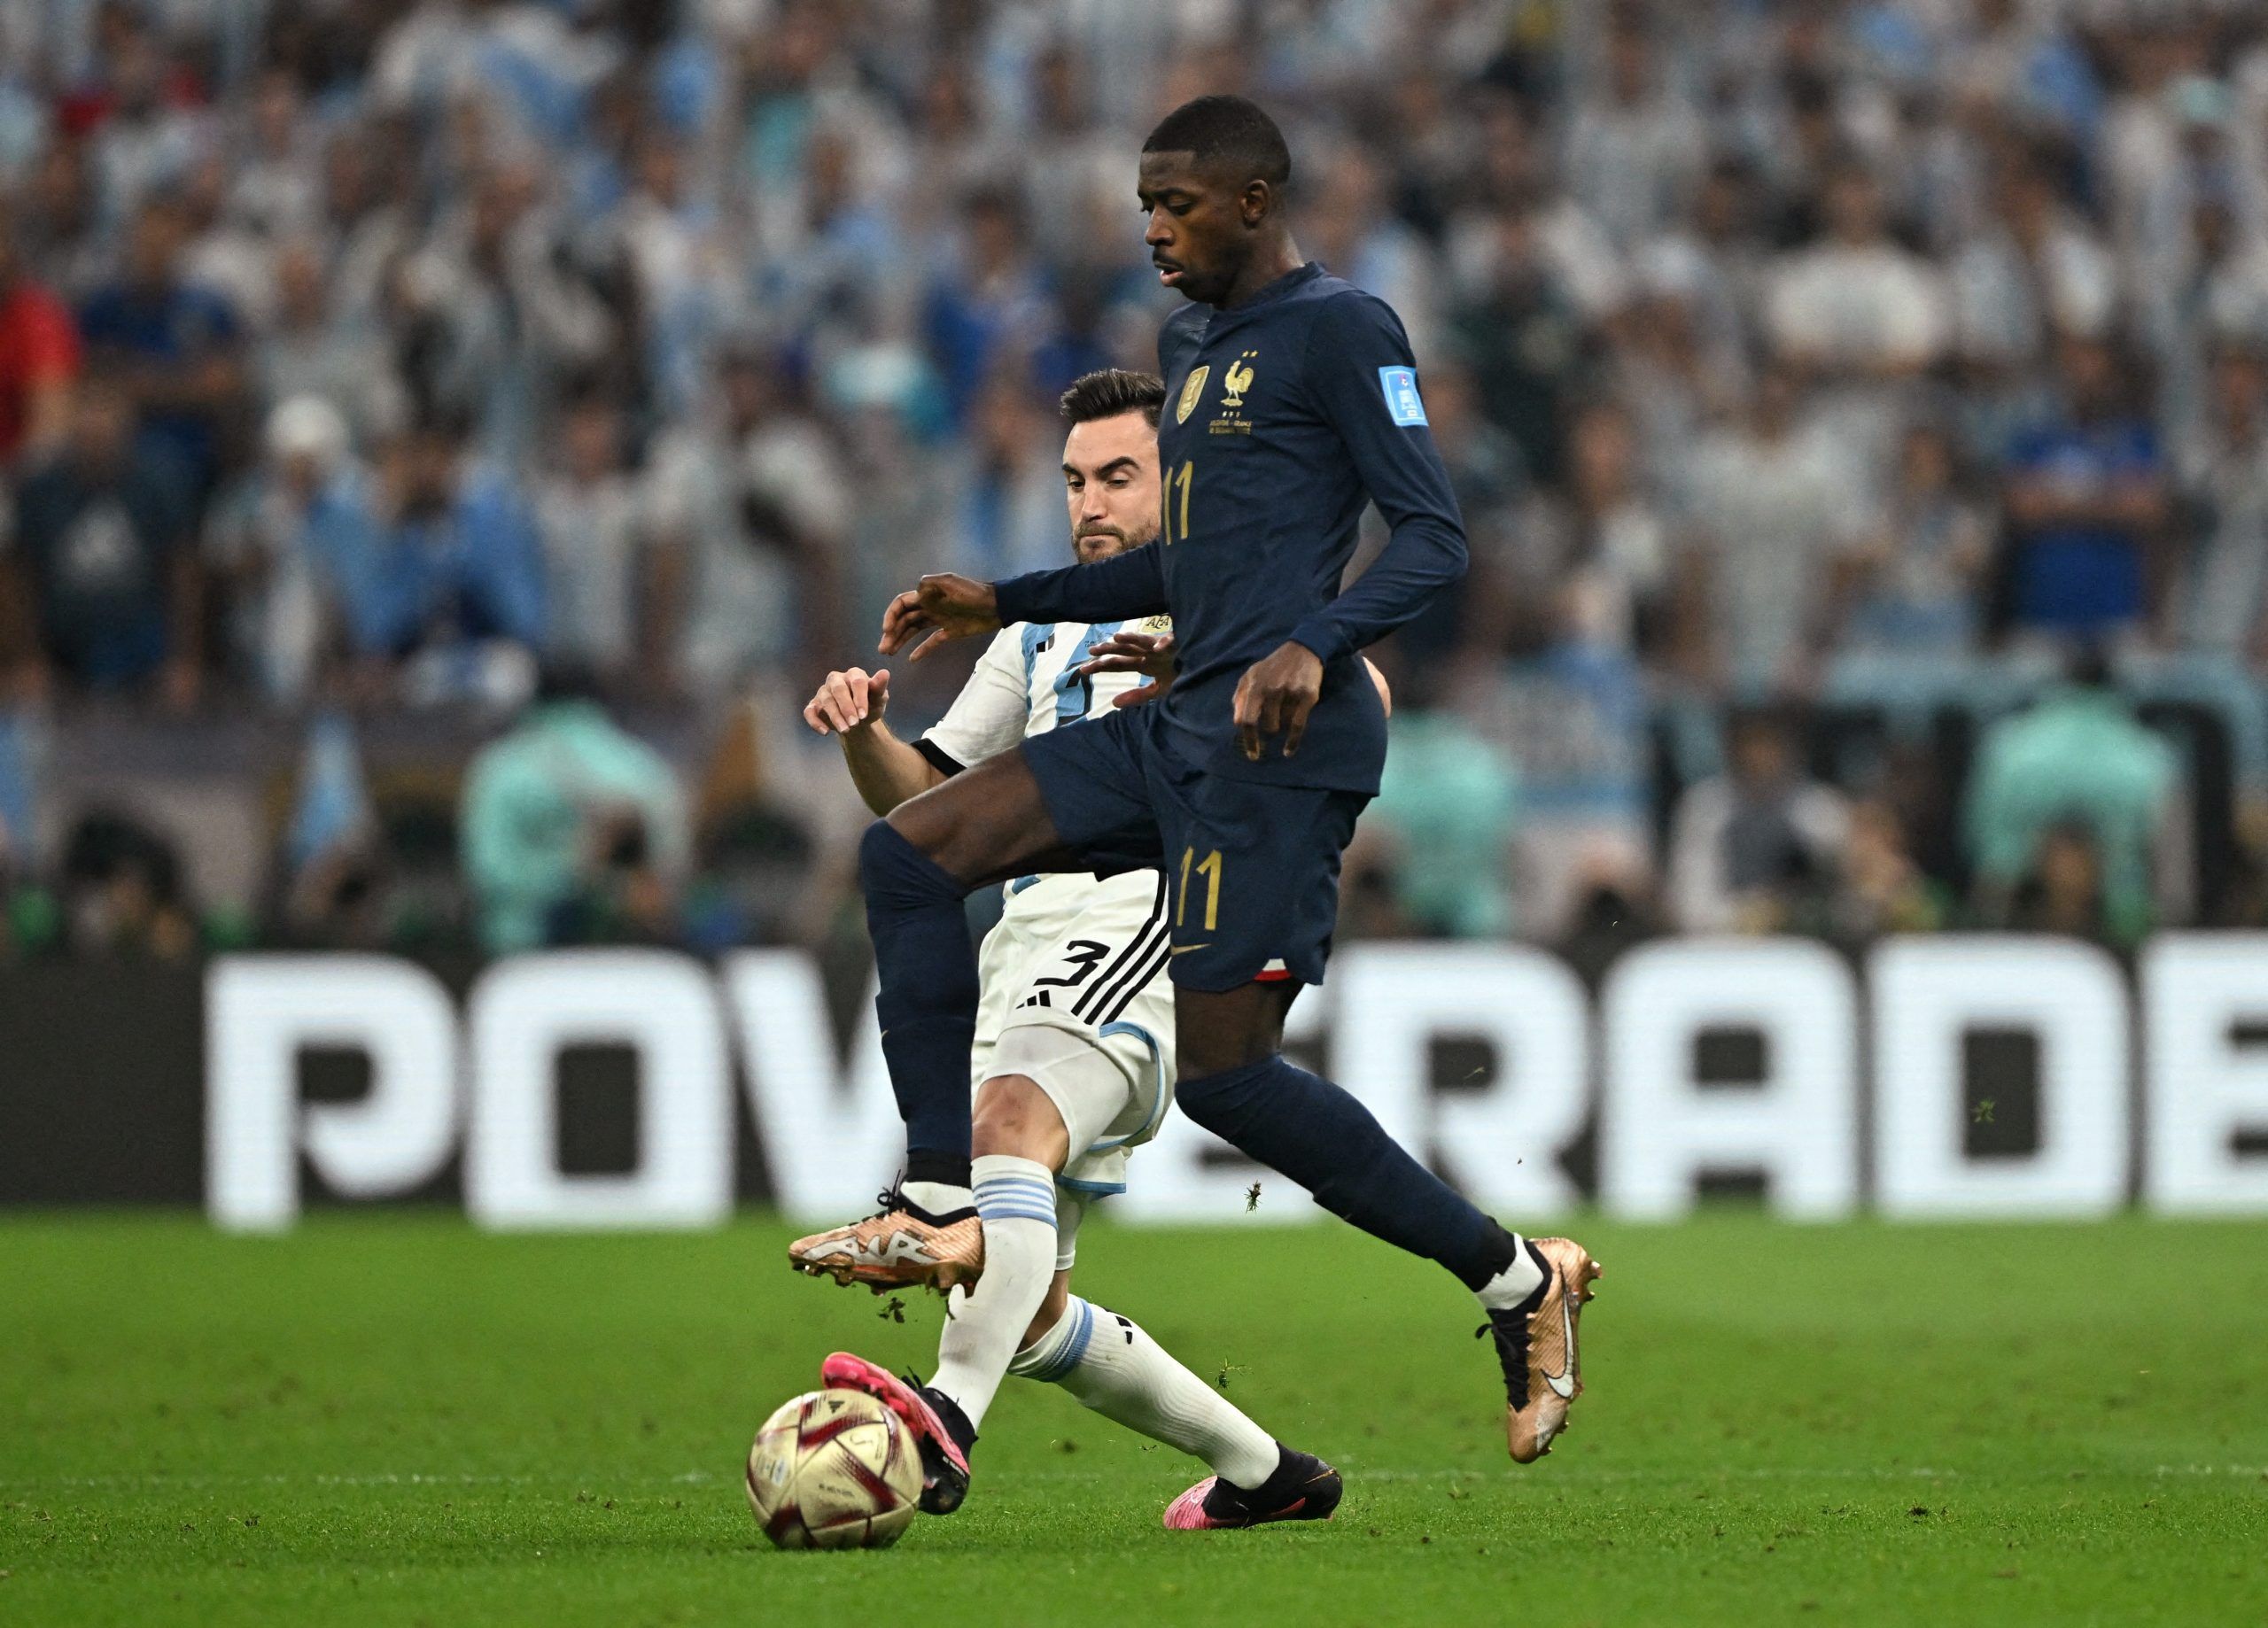 Soccer Football - FIFA World Cup Qatar 2022 - Final - Argentina v France - Lusail Stadium, Lusail, Qatar - December 18, 2022  Argentina's Nicolas Tagliafico in action with France's Ousmane Dembele REUTERS/Dylan Martinez